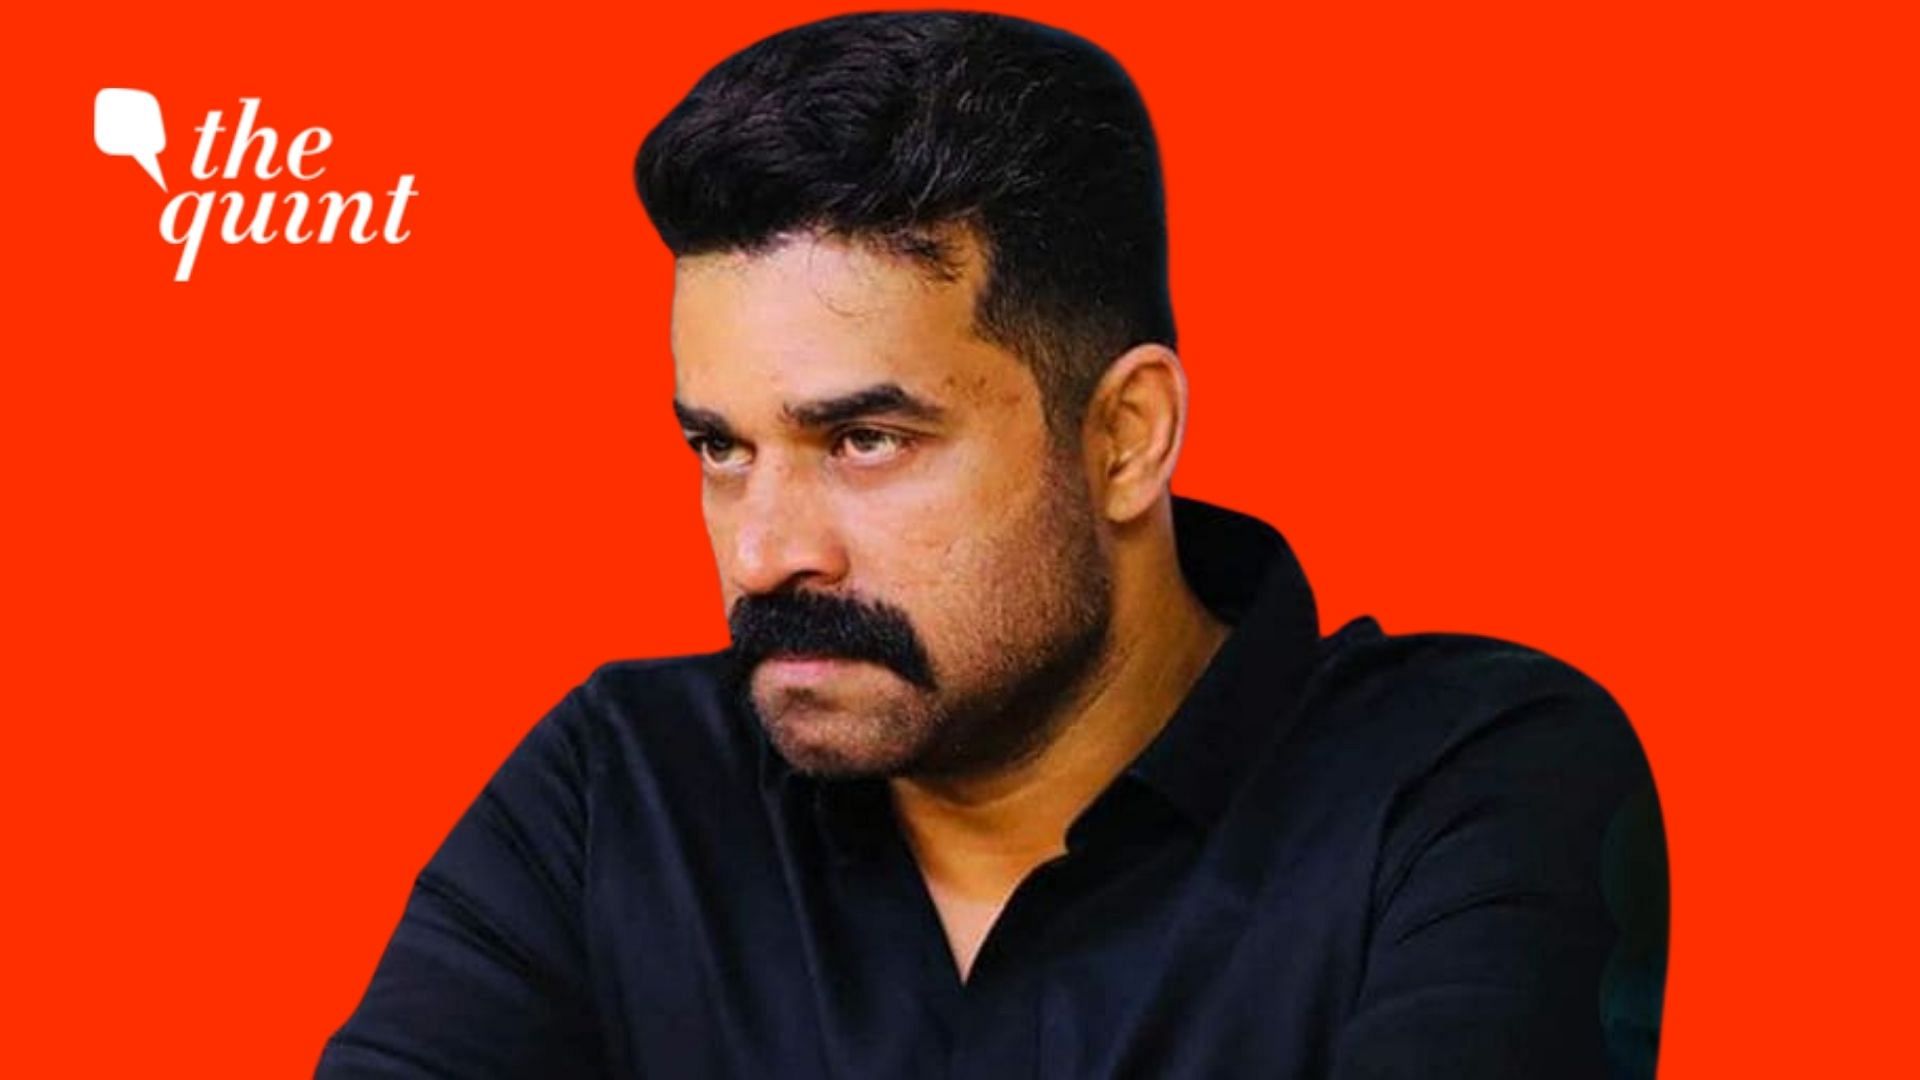 <div class="paragraphs"><p><a href="https://www.thequint.com/neon/gender/vijay-babu-producer-kerala-charged-rape-actor-survivor-identity-facebook-police-lookout-notice">A powerful man is accused of sexual assault </a>by a woman. Immediately, a witch-hunt is set in motion, where the character of the woman is put under scrutiny.&nbsp;</p></div>